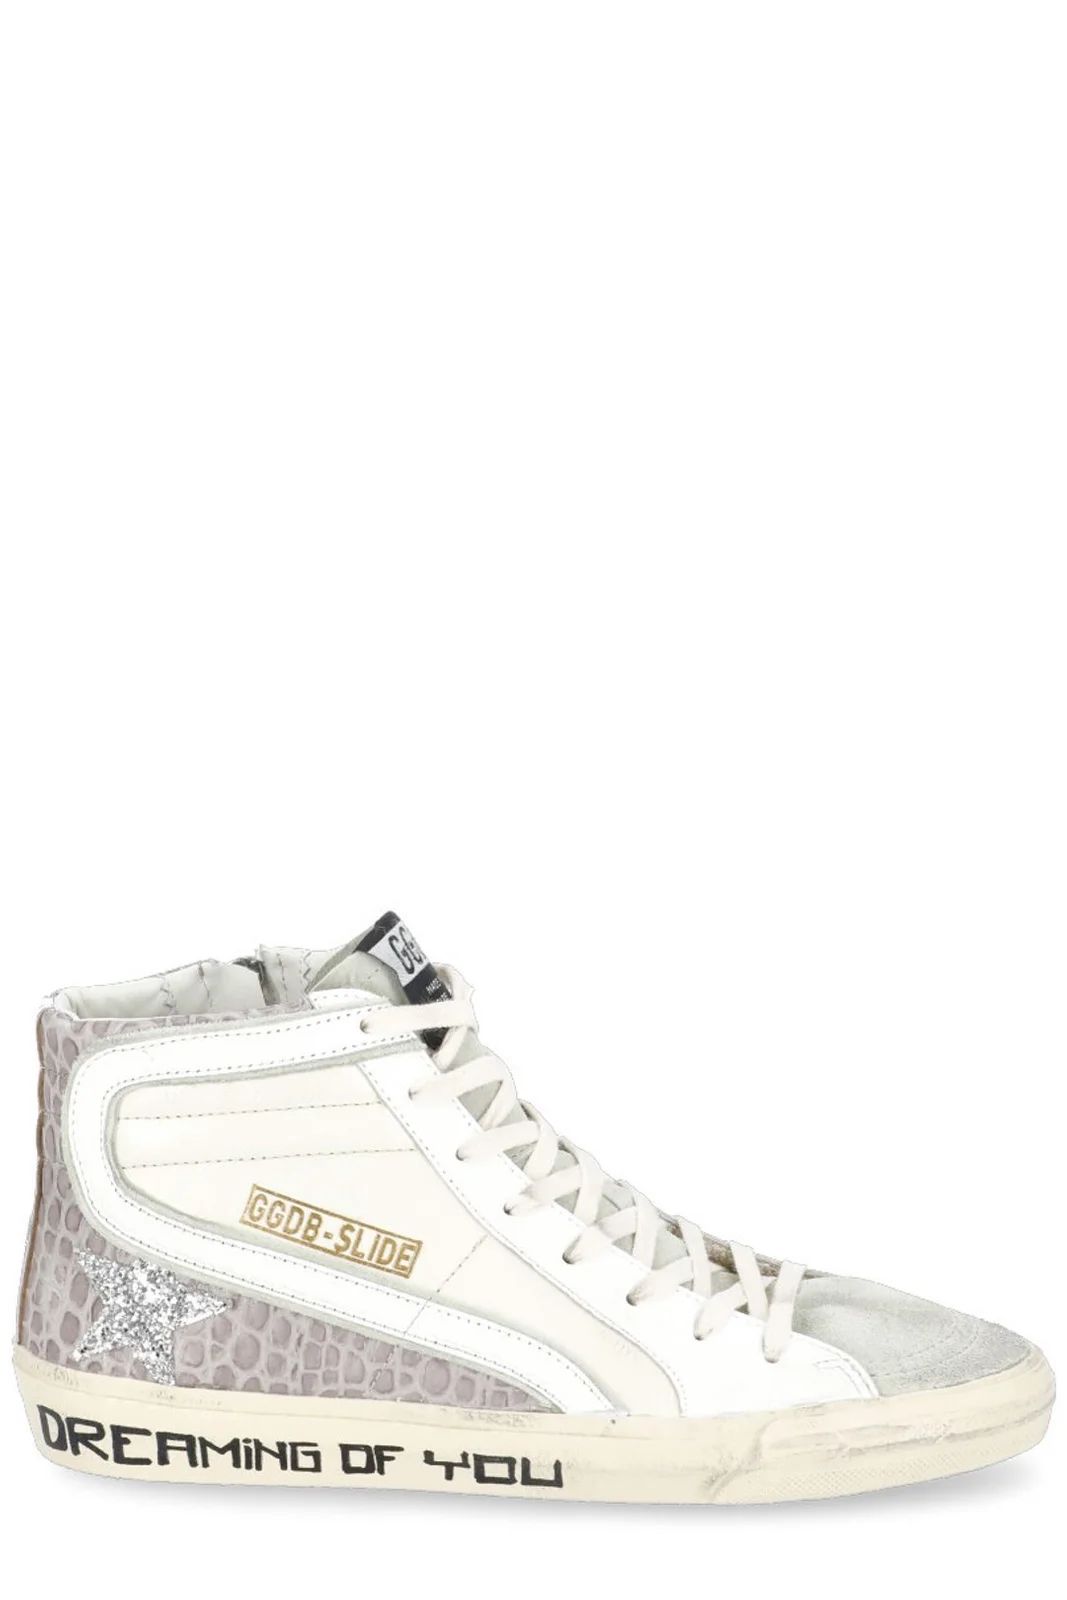 Golden Goose Slide Panelled Lace-Up Sneakers | Cettire Global